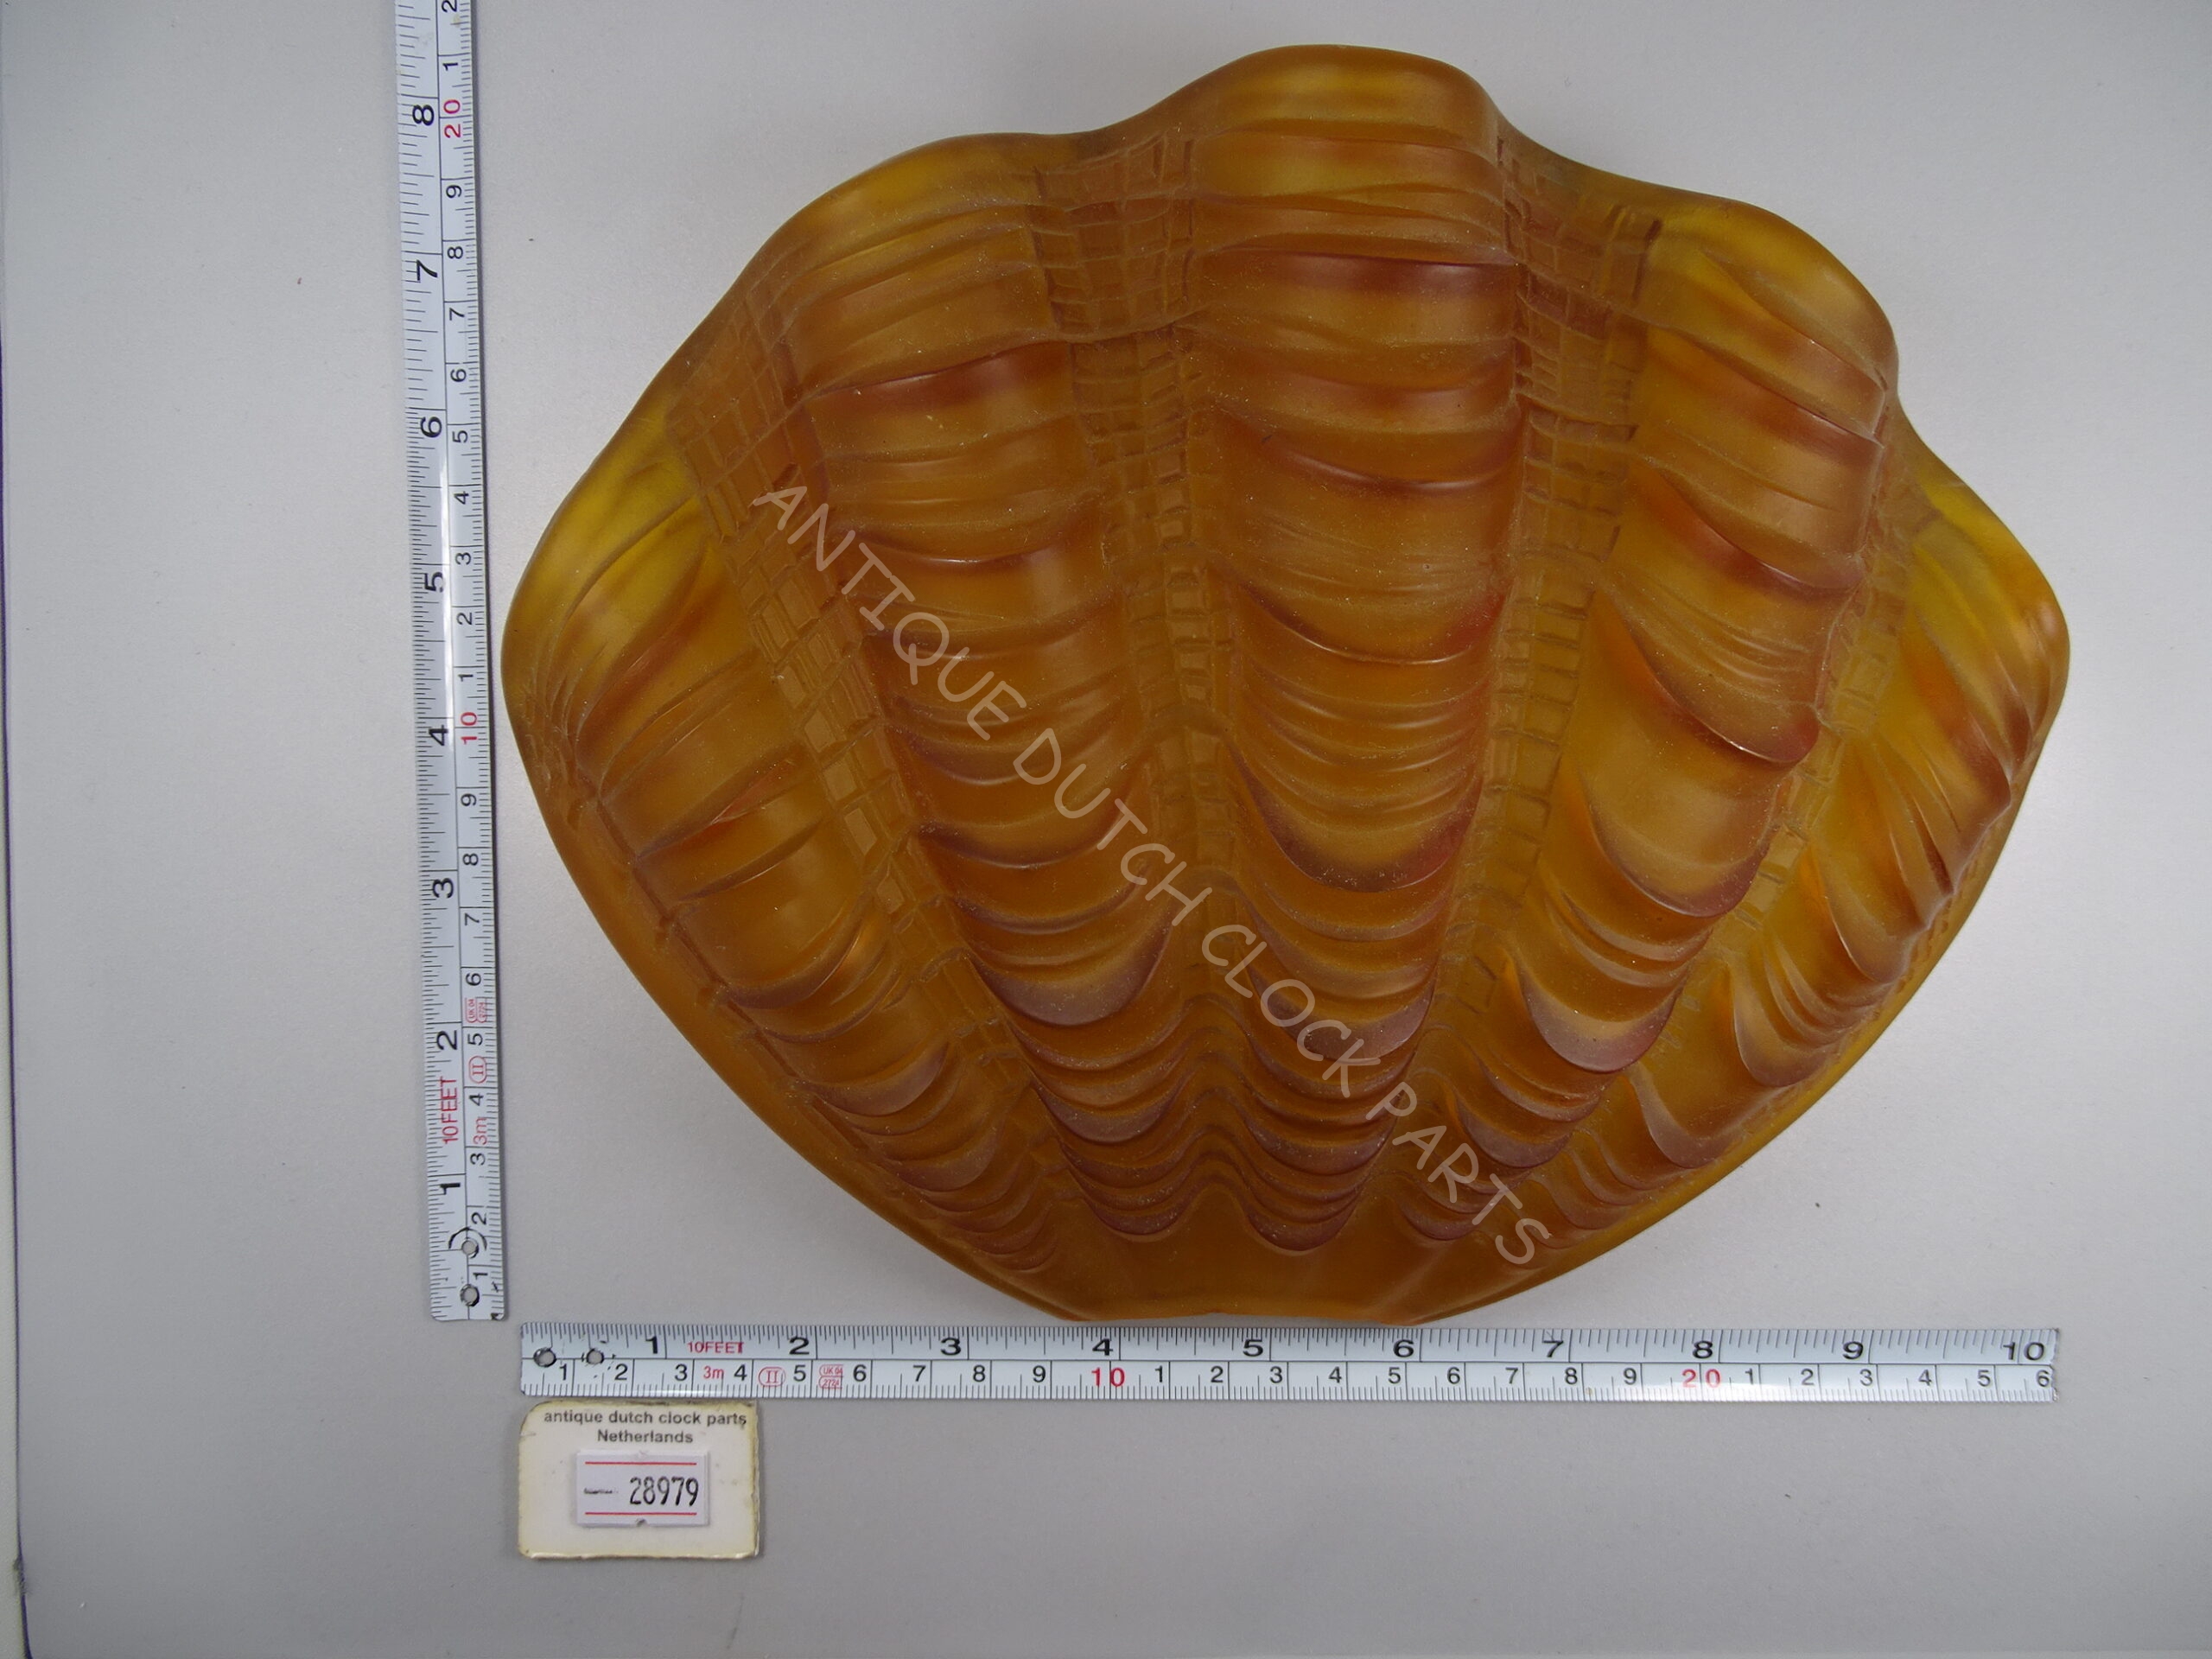 BROWN/ORANGE COLORED GLASS SHELL SHAPED LAMP SHADE FOR WALL OR CEILING LIGHTS